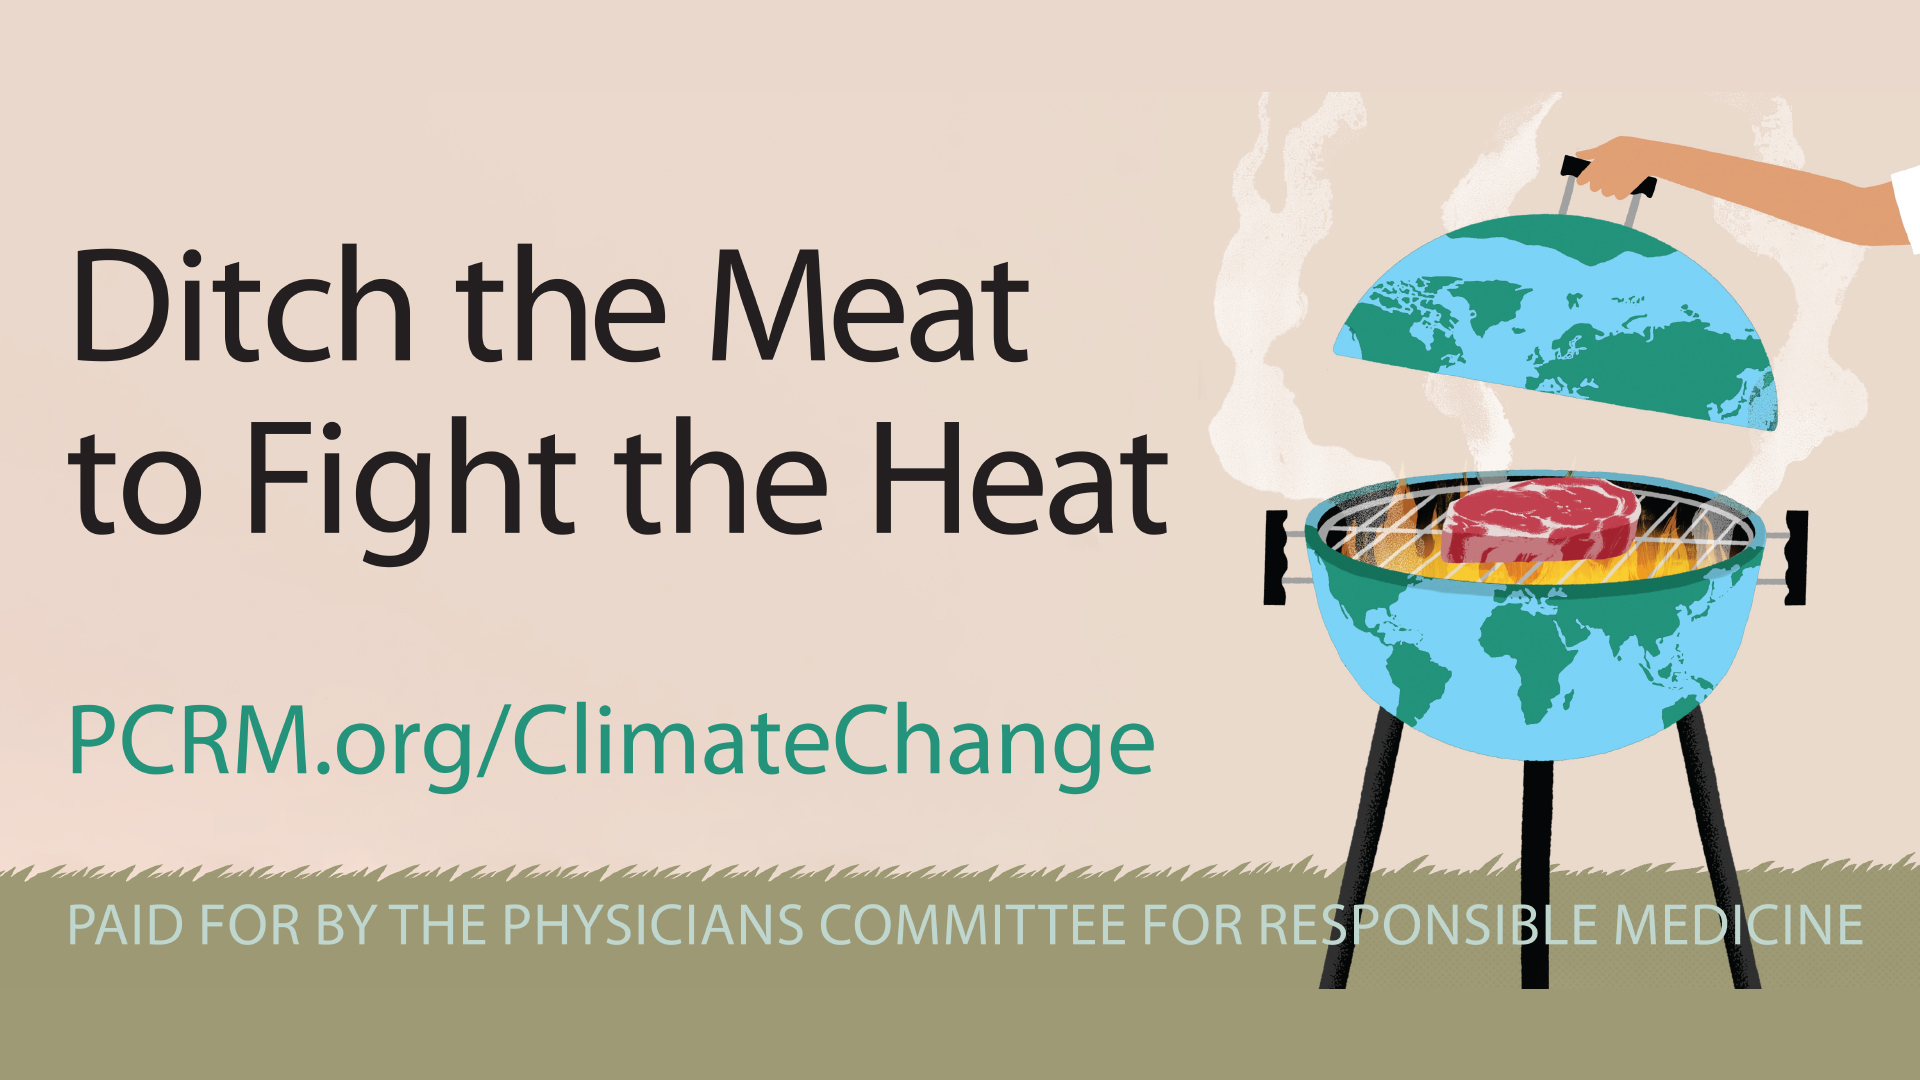 SAULT STE. MARIE, Mich.—“Ditch the Meat to Fight the Heat,” urges a billboard the Physicians Committee for Responsible Medicine placed in Sault Ste. Marie, Mich., this Earth Month.